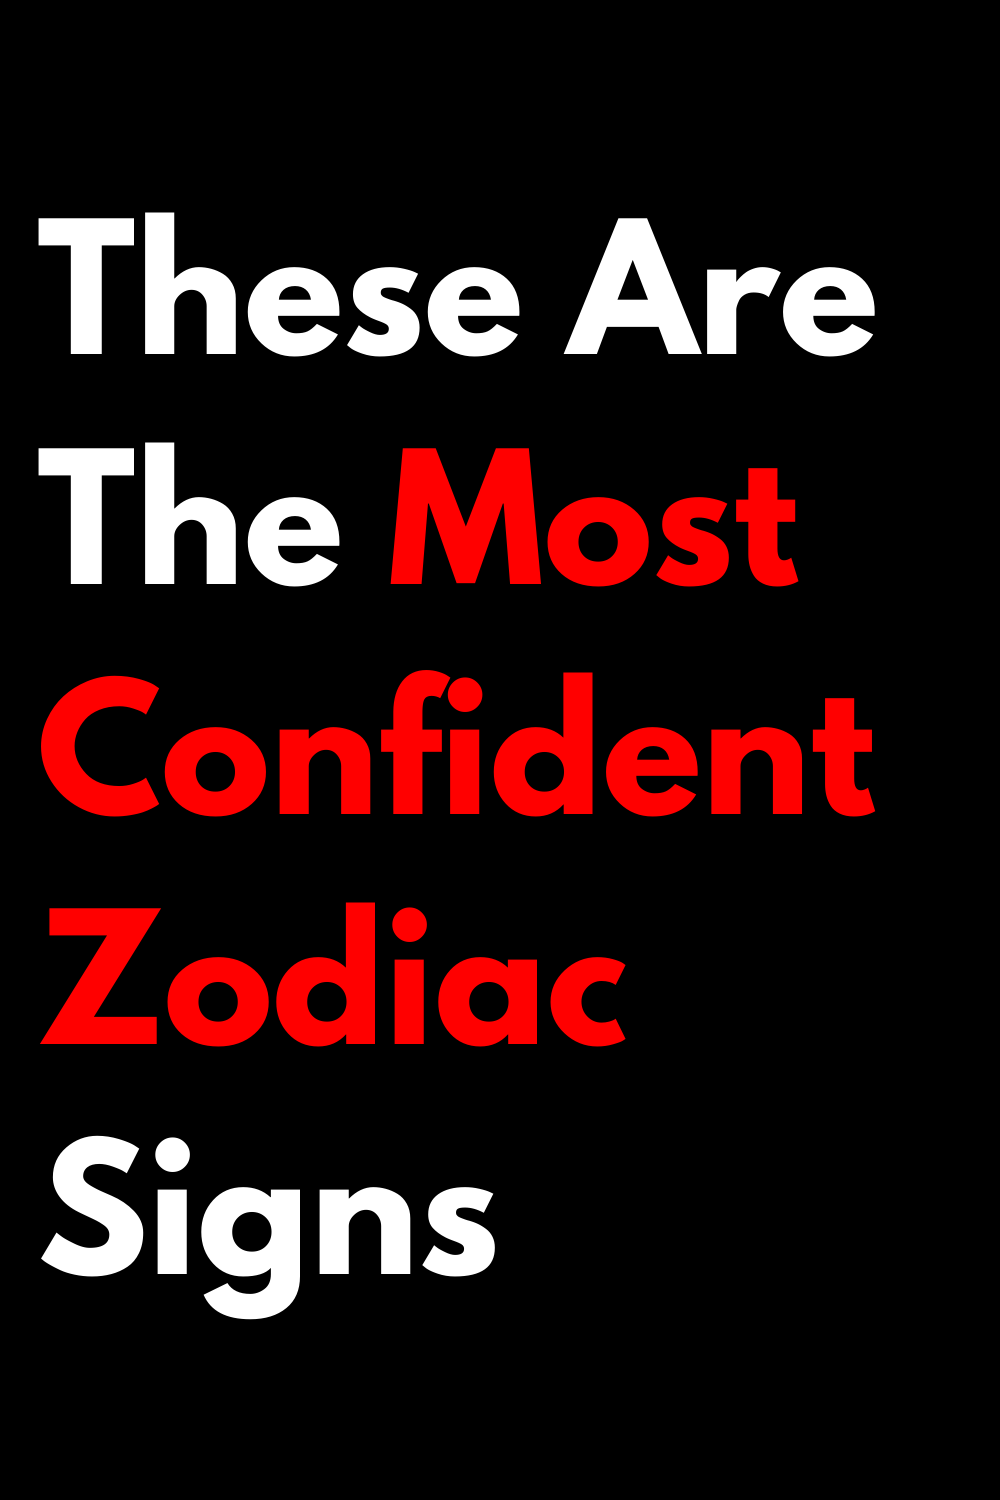 These Are The Most Confident Zodiac Signs